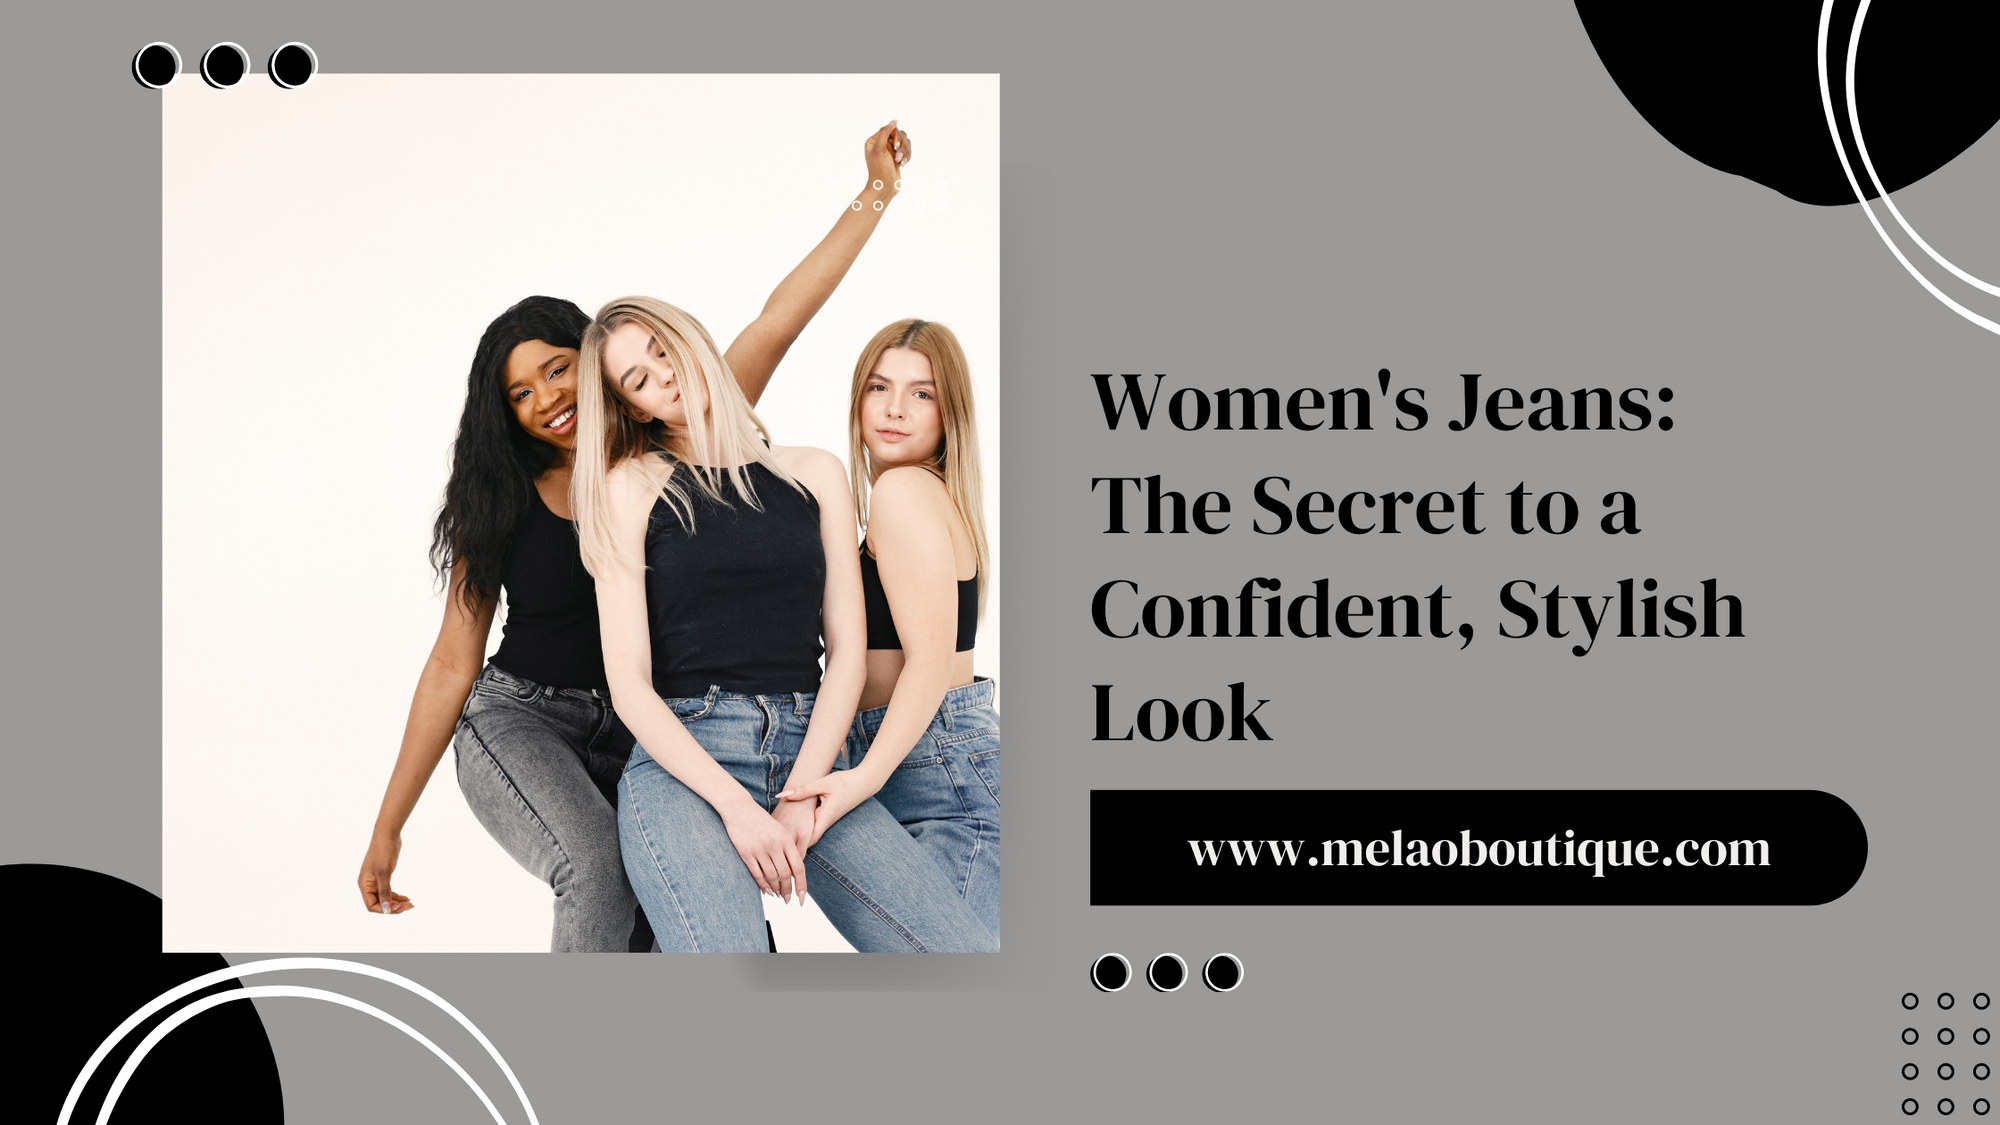 Women's Jeans The Secret to a Confident, Stylish Look